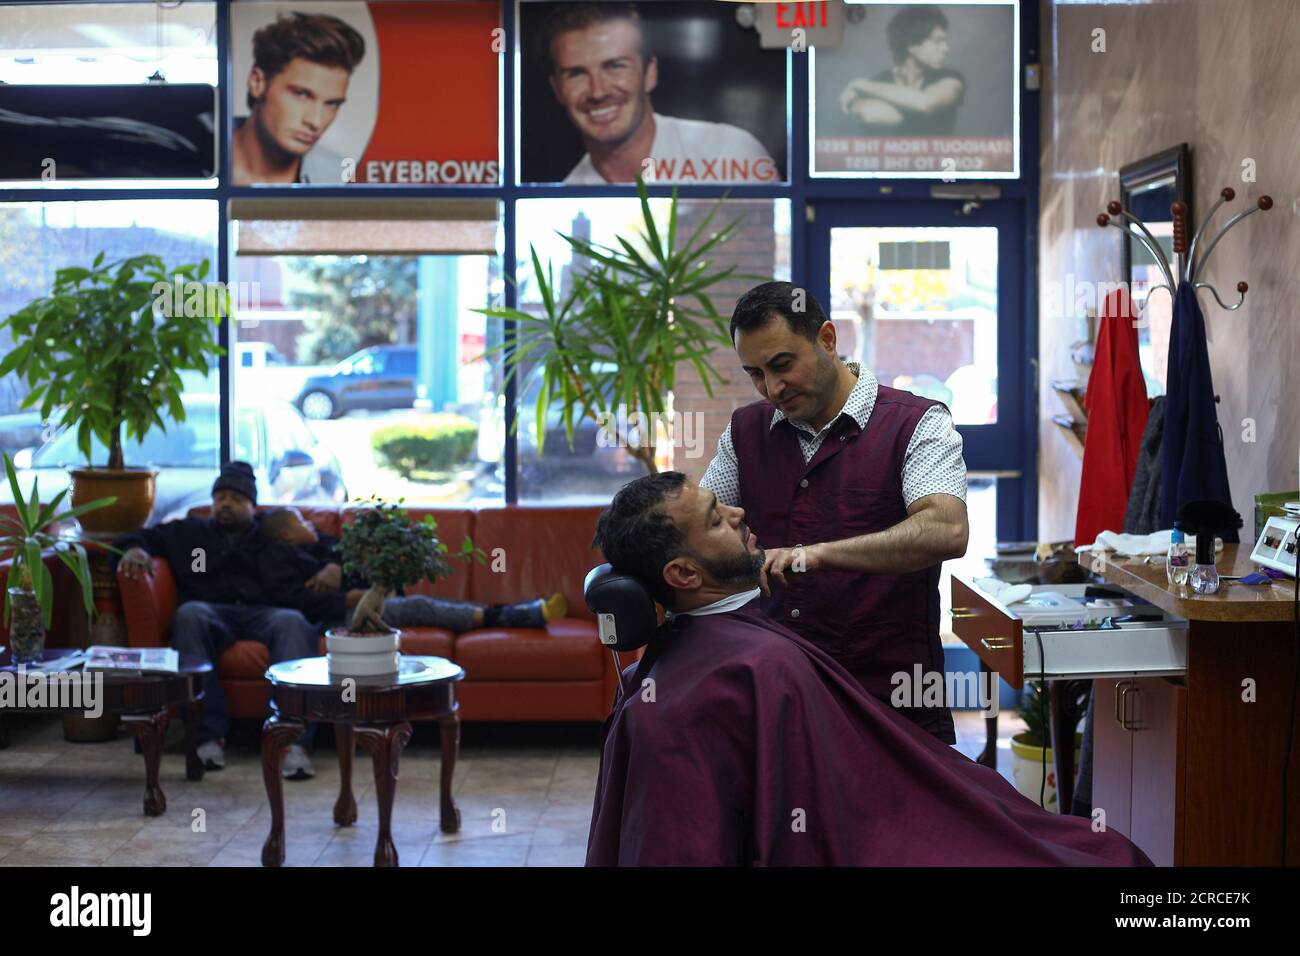 Barber Ala Ridha, 42, trims the beard of Moay Momo, 39, at Sinbad's Hair  Salon in Dearborn, Michigan, ., on November 12, 2016. REUTERS/Brittany  Greeson Stock Photo - Alamy